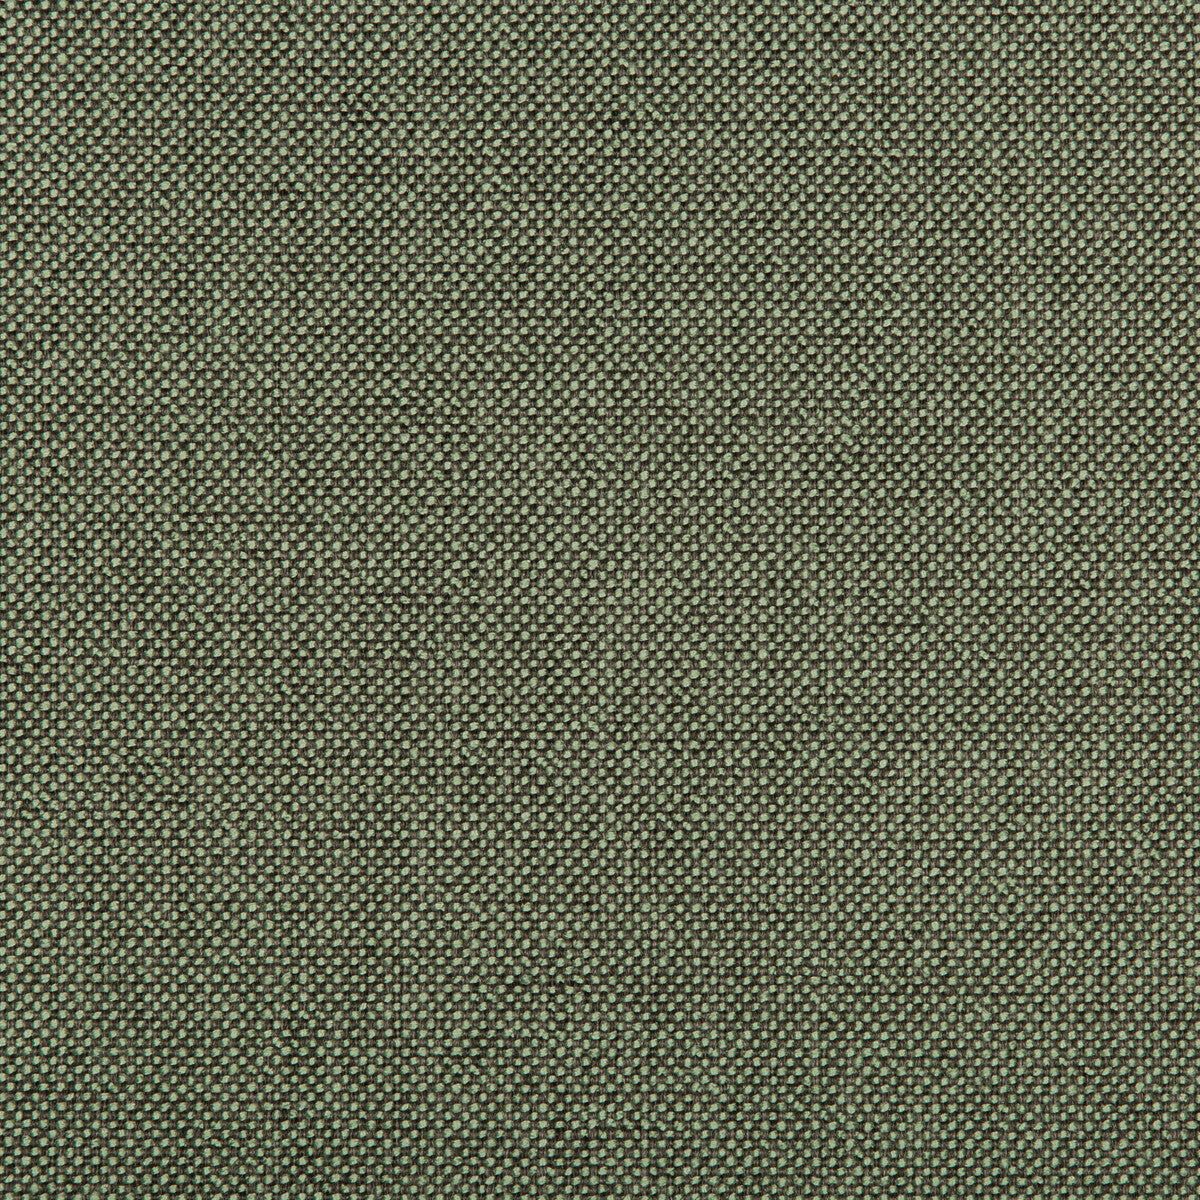 Williams fabric in pistachio color - pattern 35744.321.0 - by Kravet Contract in the Value Kravetarmor collection